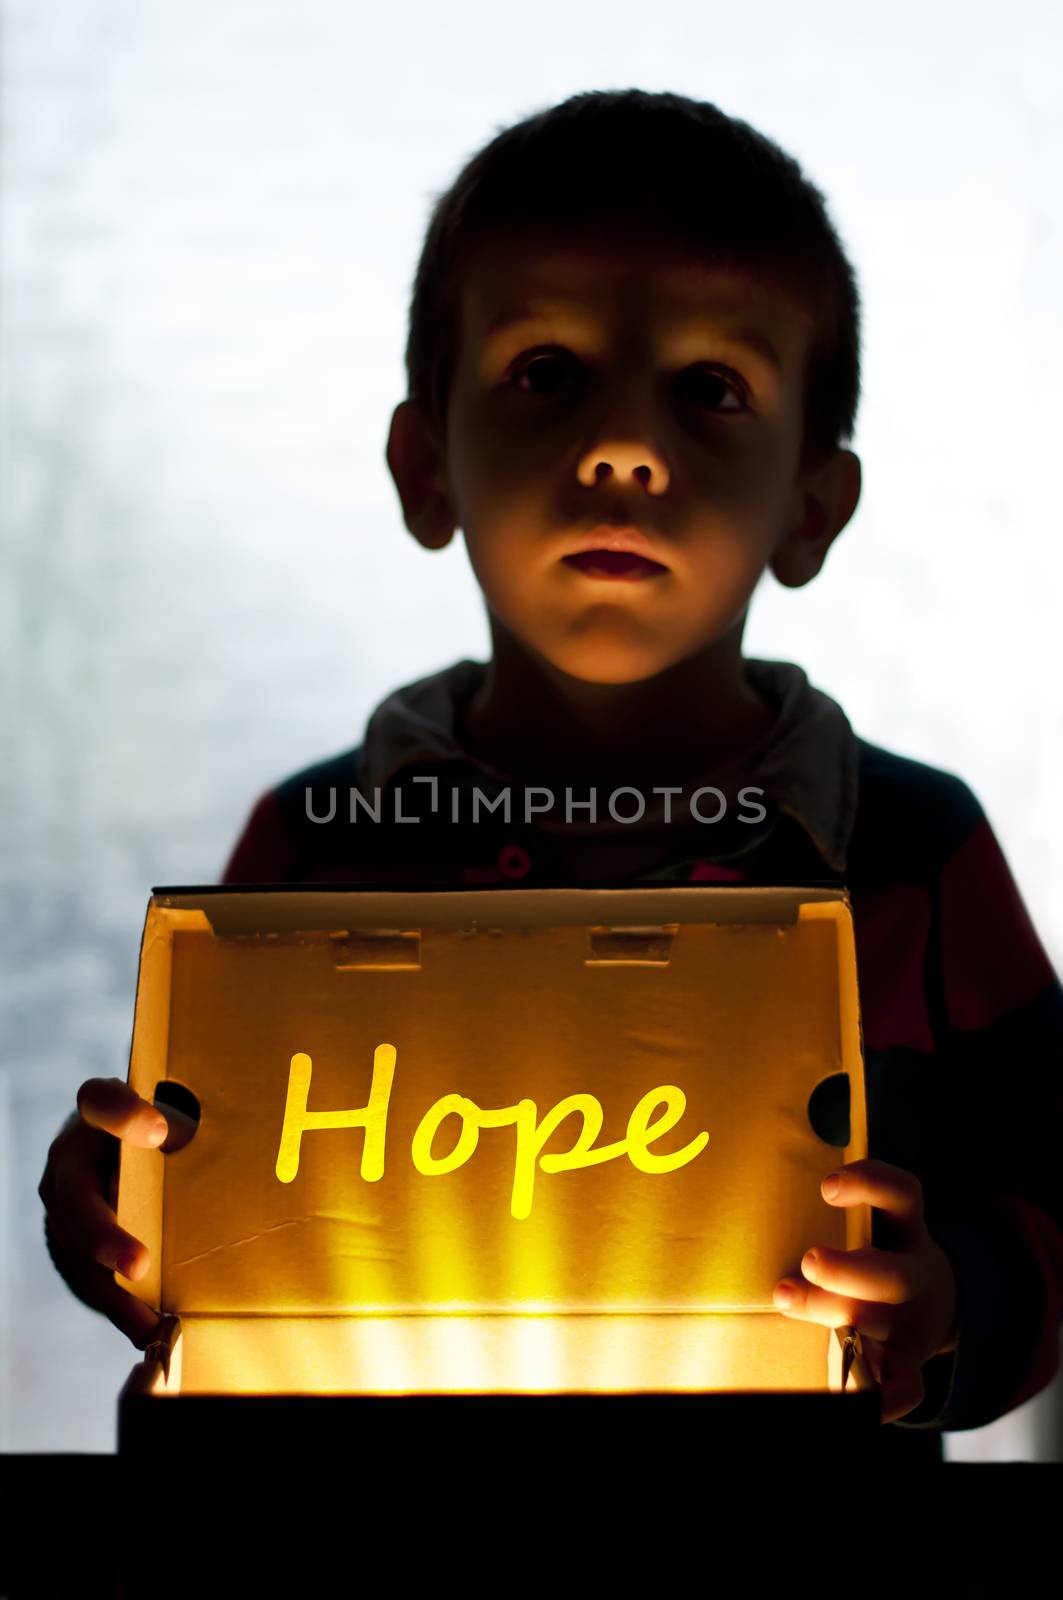 Child and box shine light. Call for help and hope. Help me